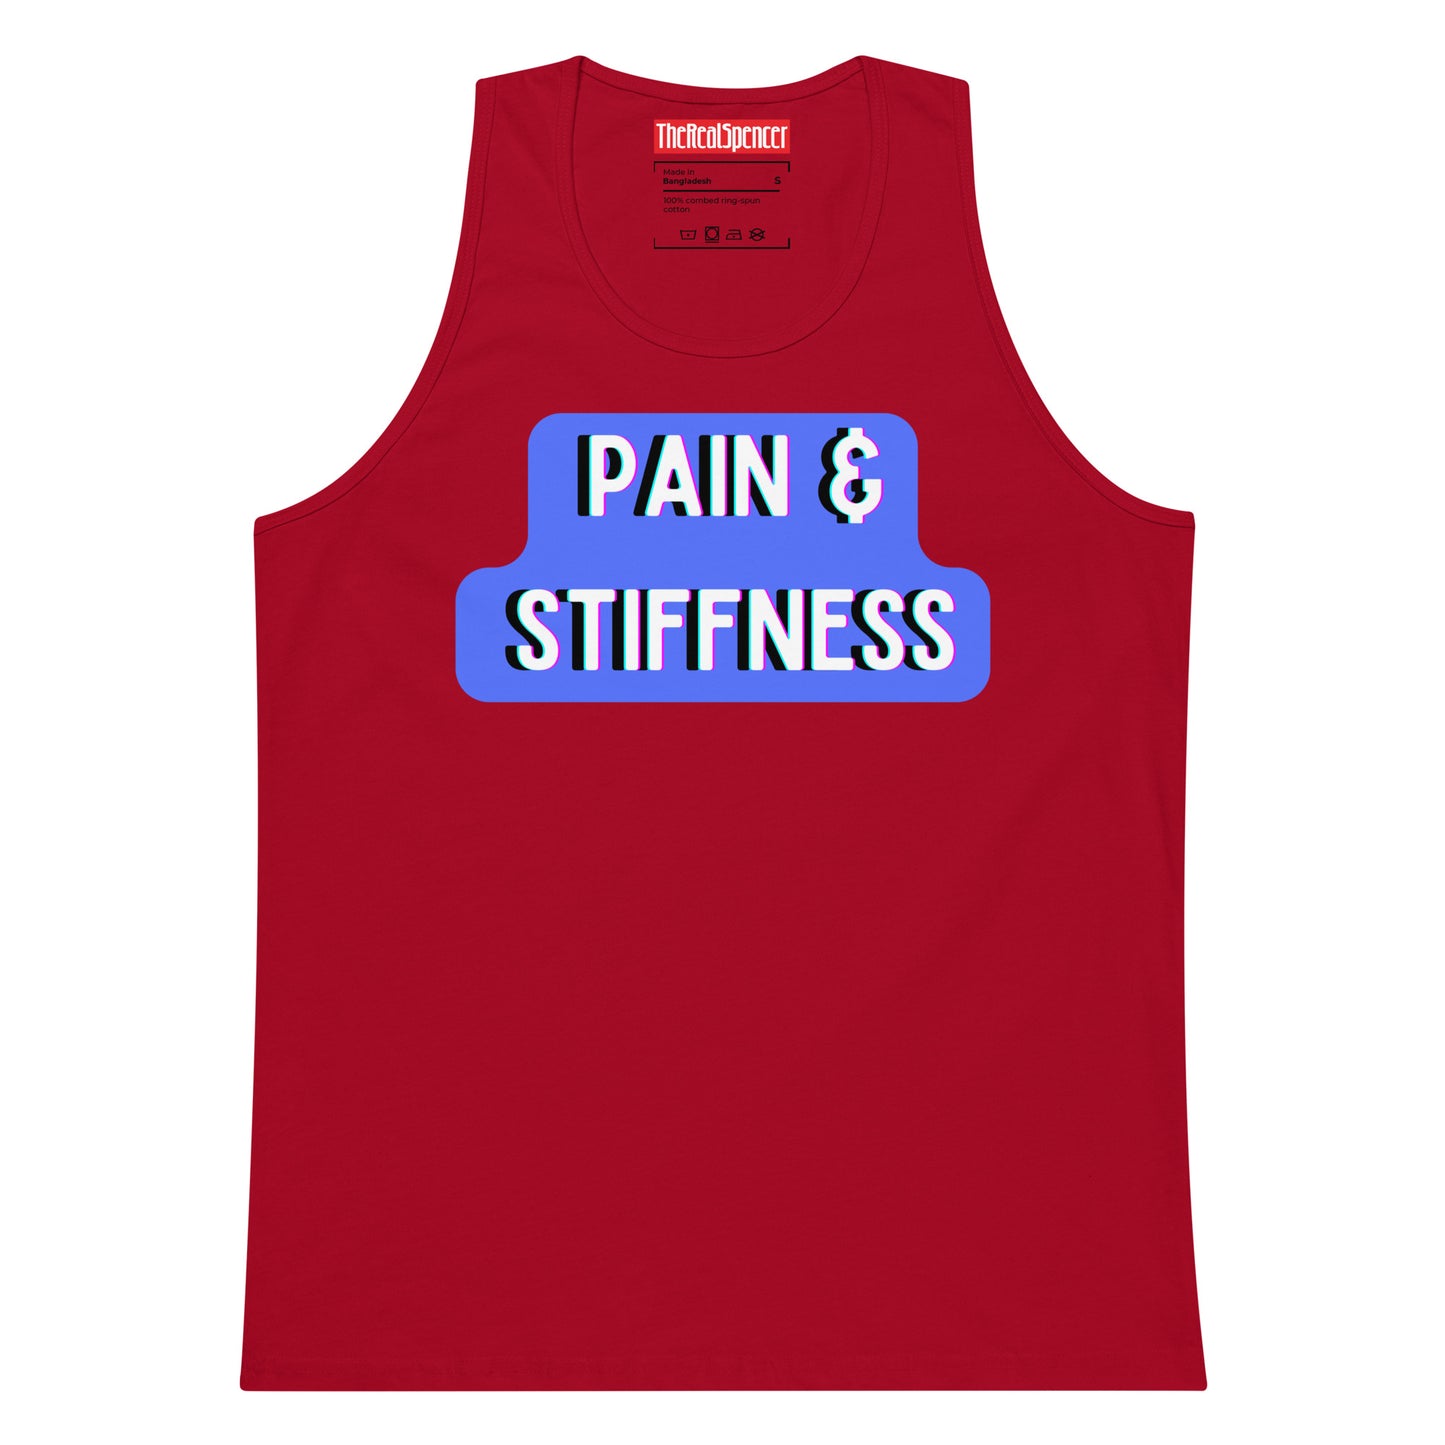 Pain and Stiffness Tank Top